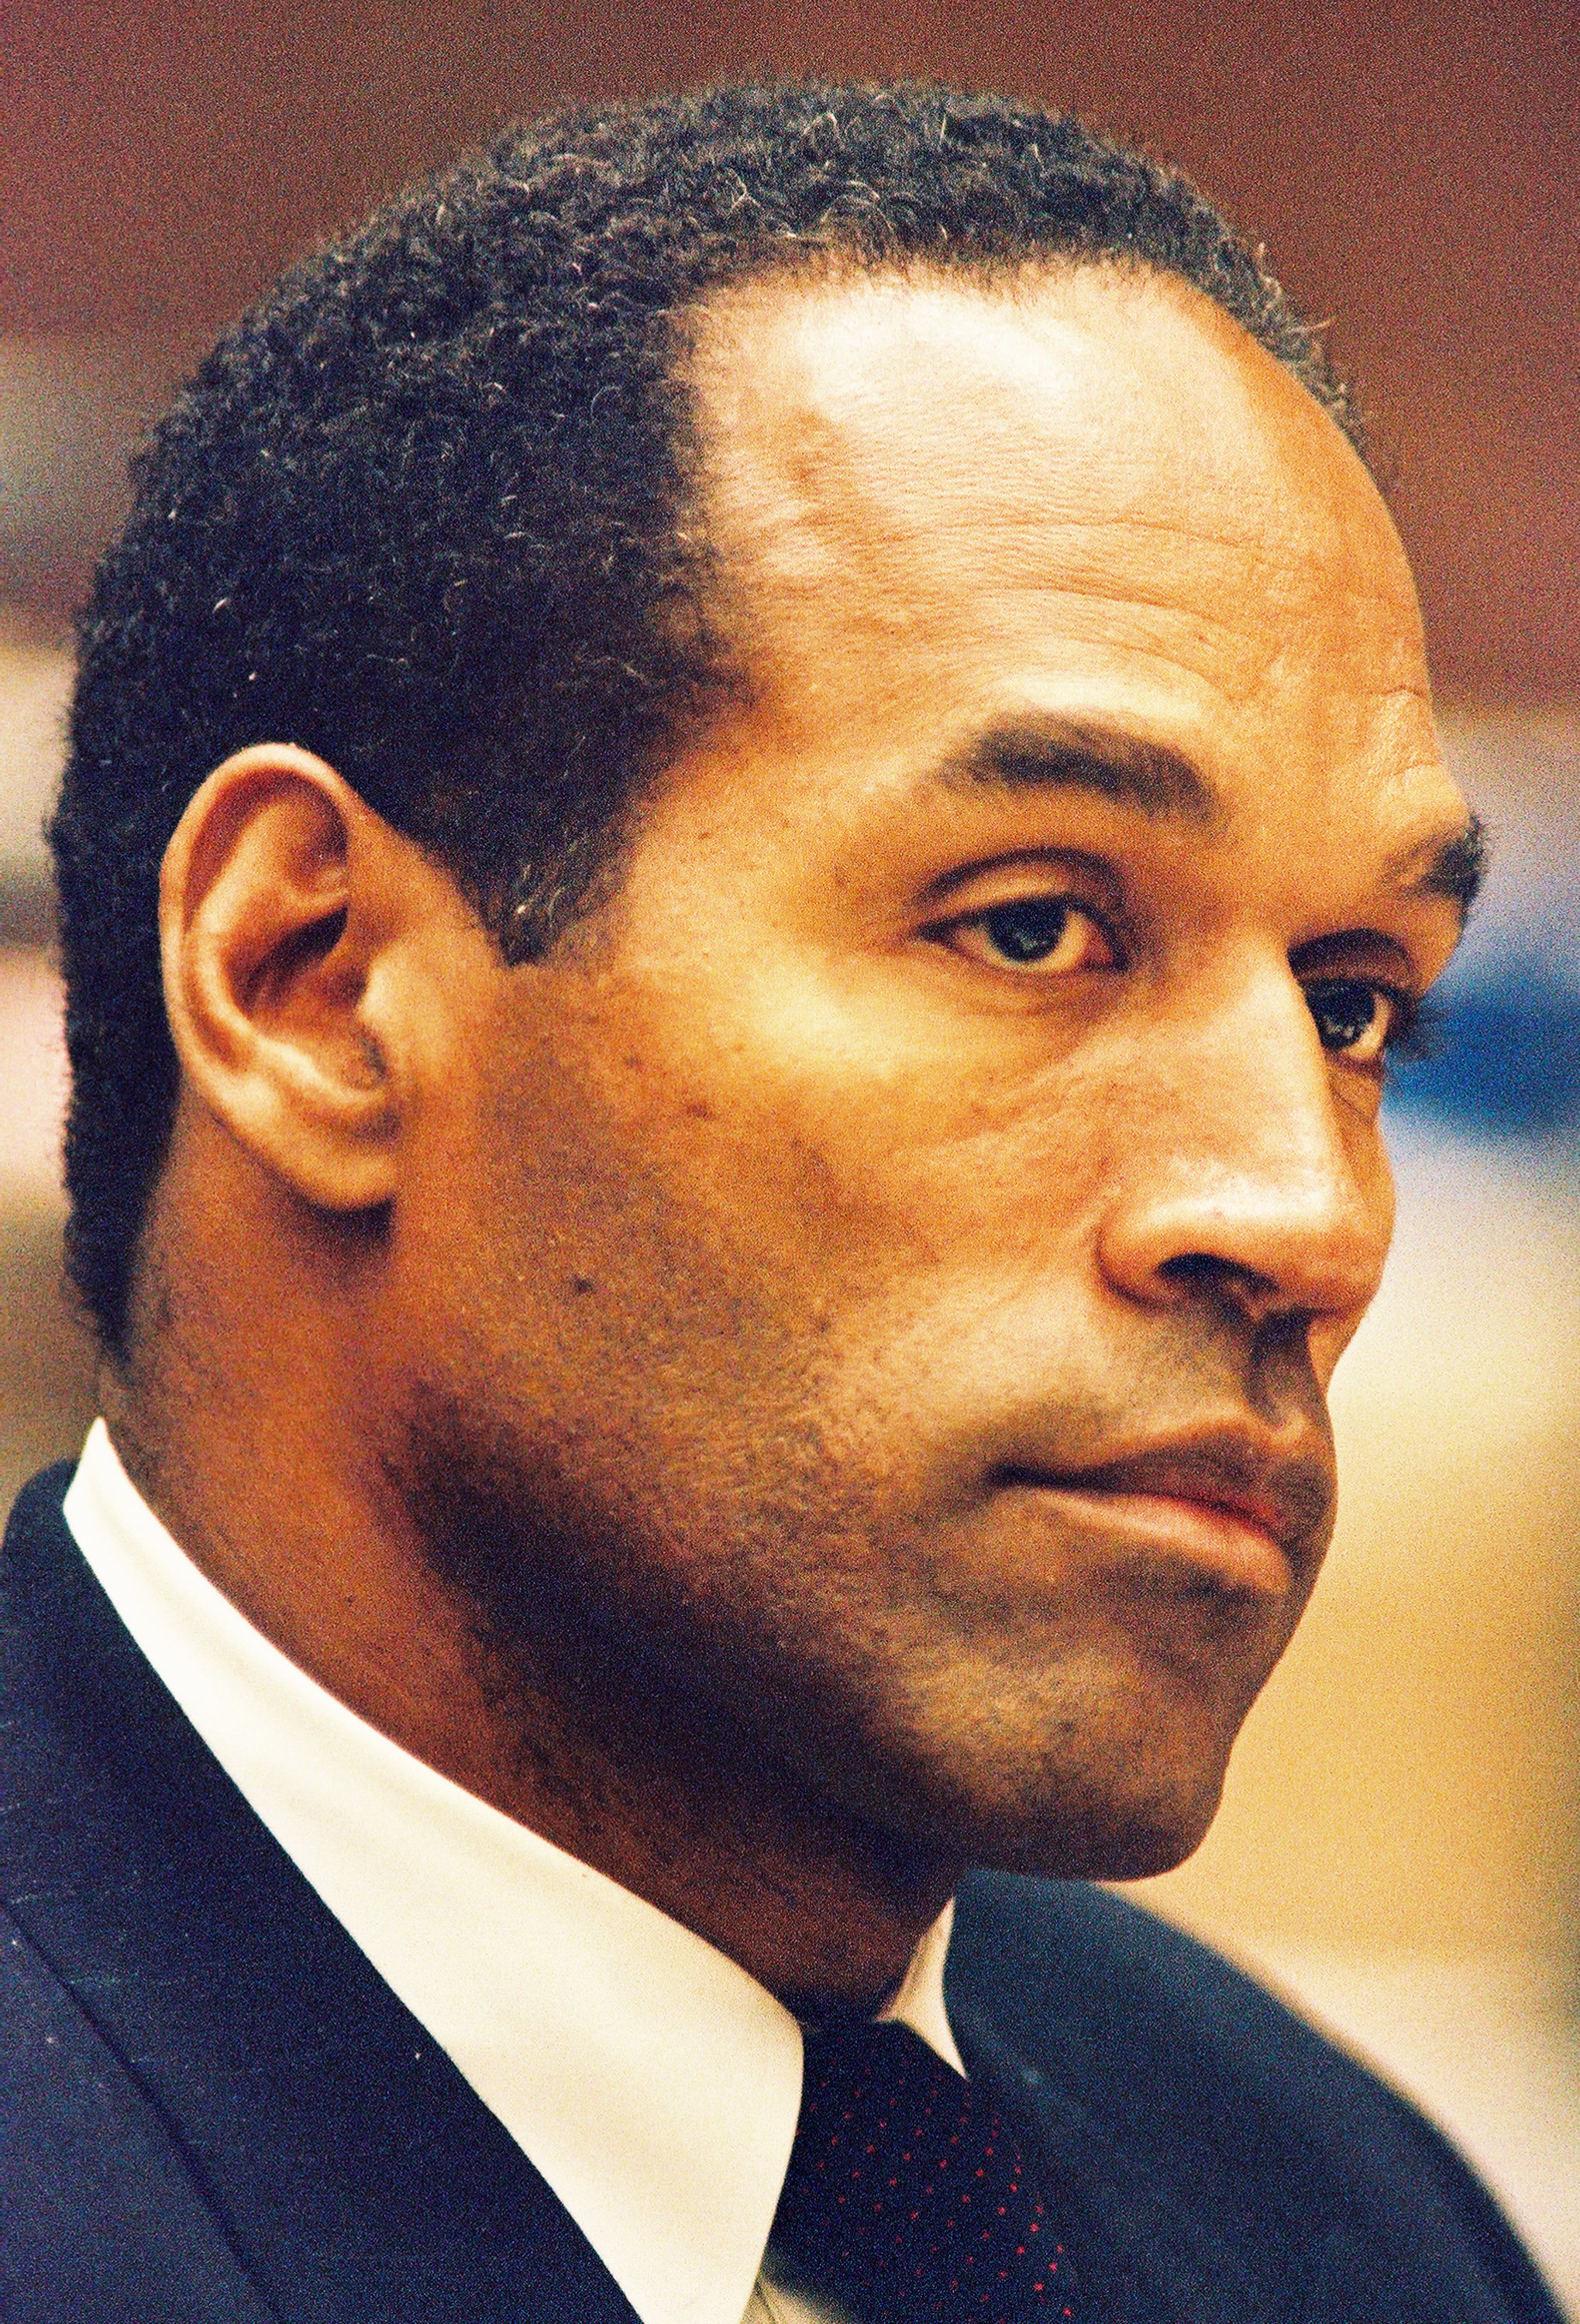 O.J. Simpson is shown during testimony in a preliminary hearing following the murders of his ex-wife Nicole Brown Simpson and her friend Ronald Goldman July 7, 1994 in Los Angeles. (Photo by Lee Celano/WireImage) (Lee Celano&mdash;WireImage)